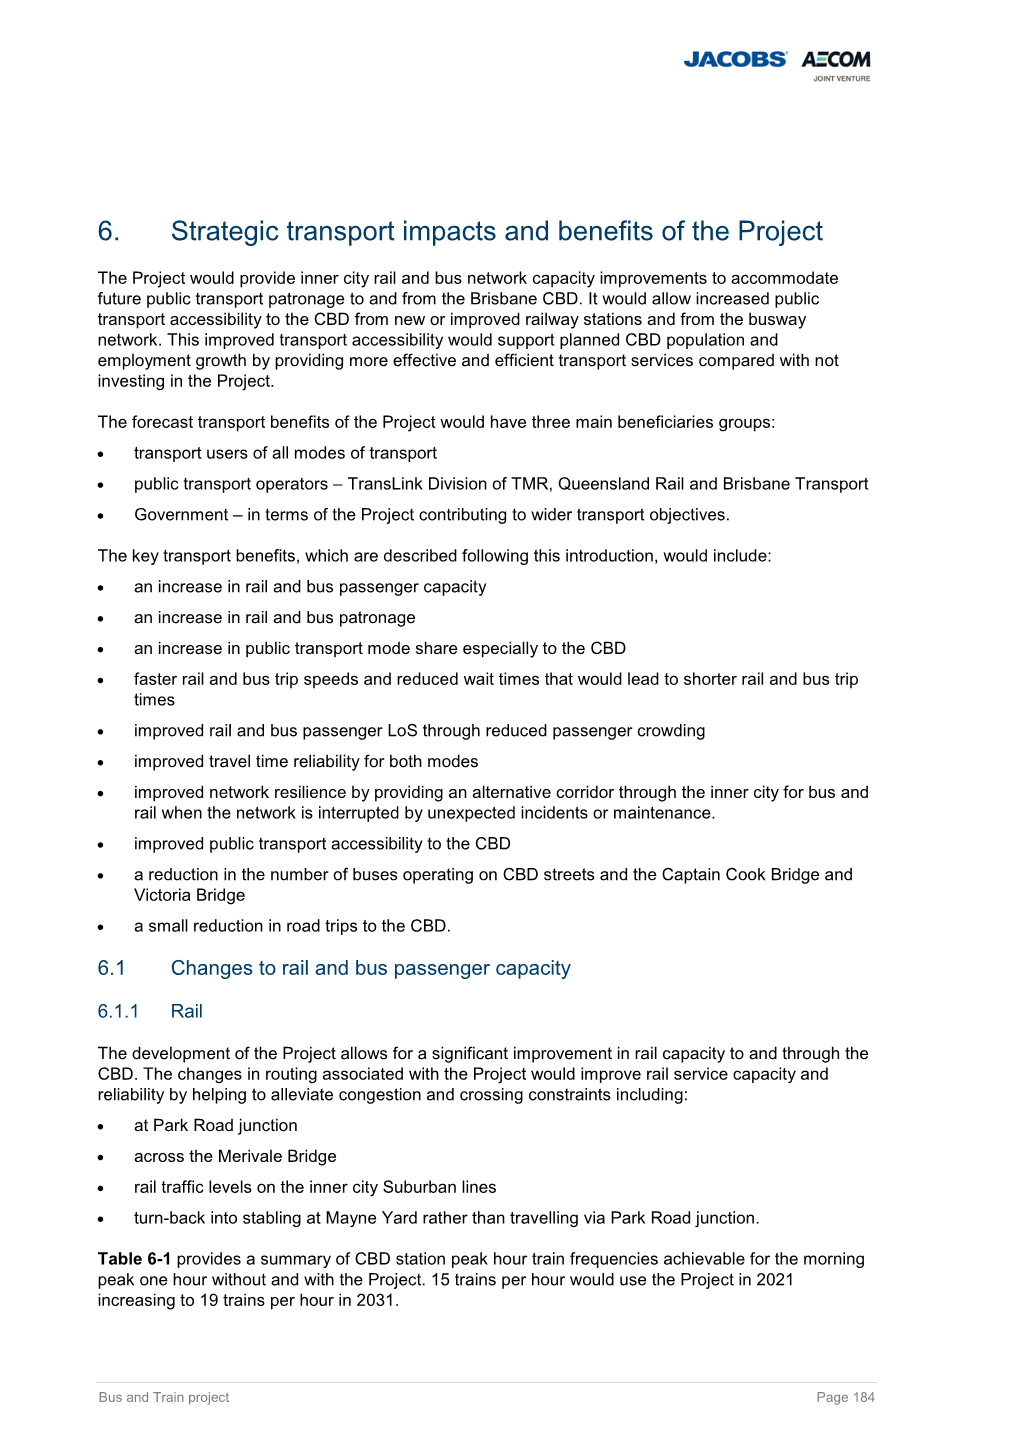 6. Strategic Transport Impacts and Benefits of the Project